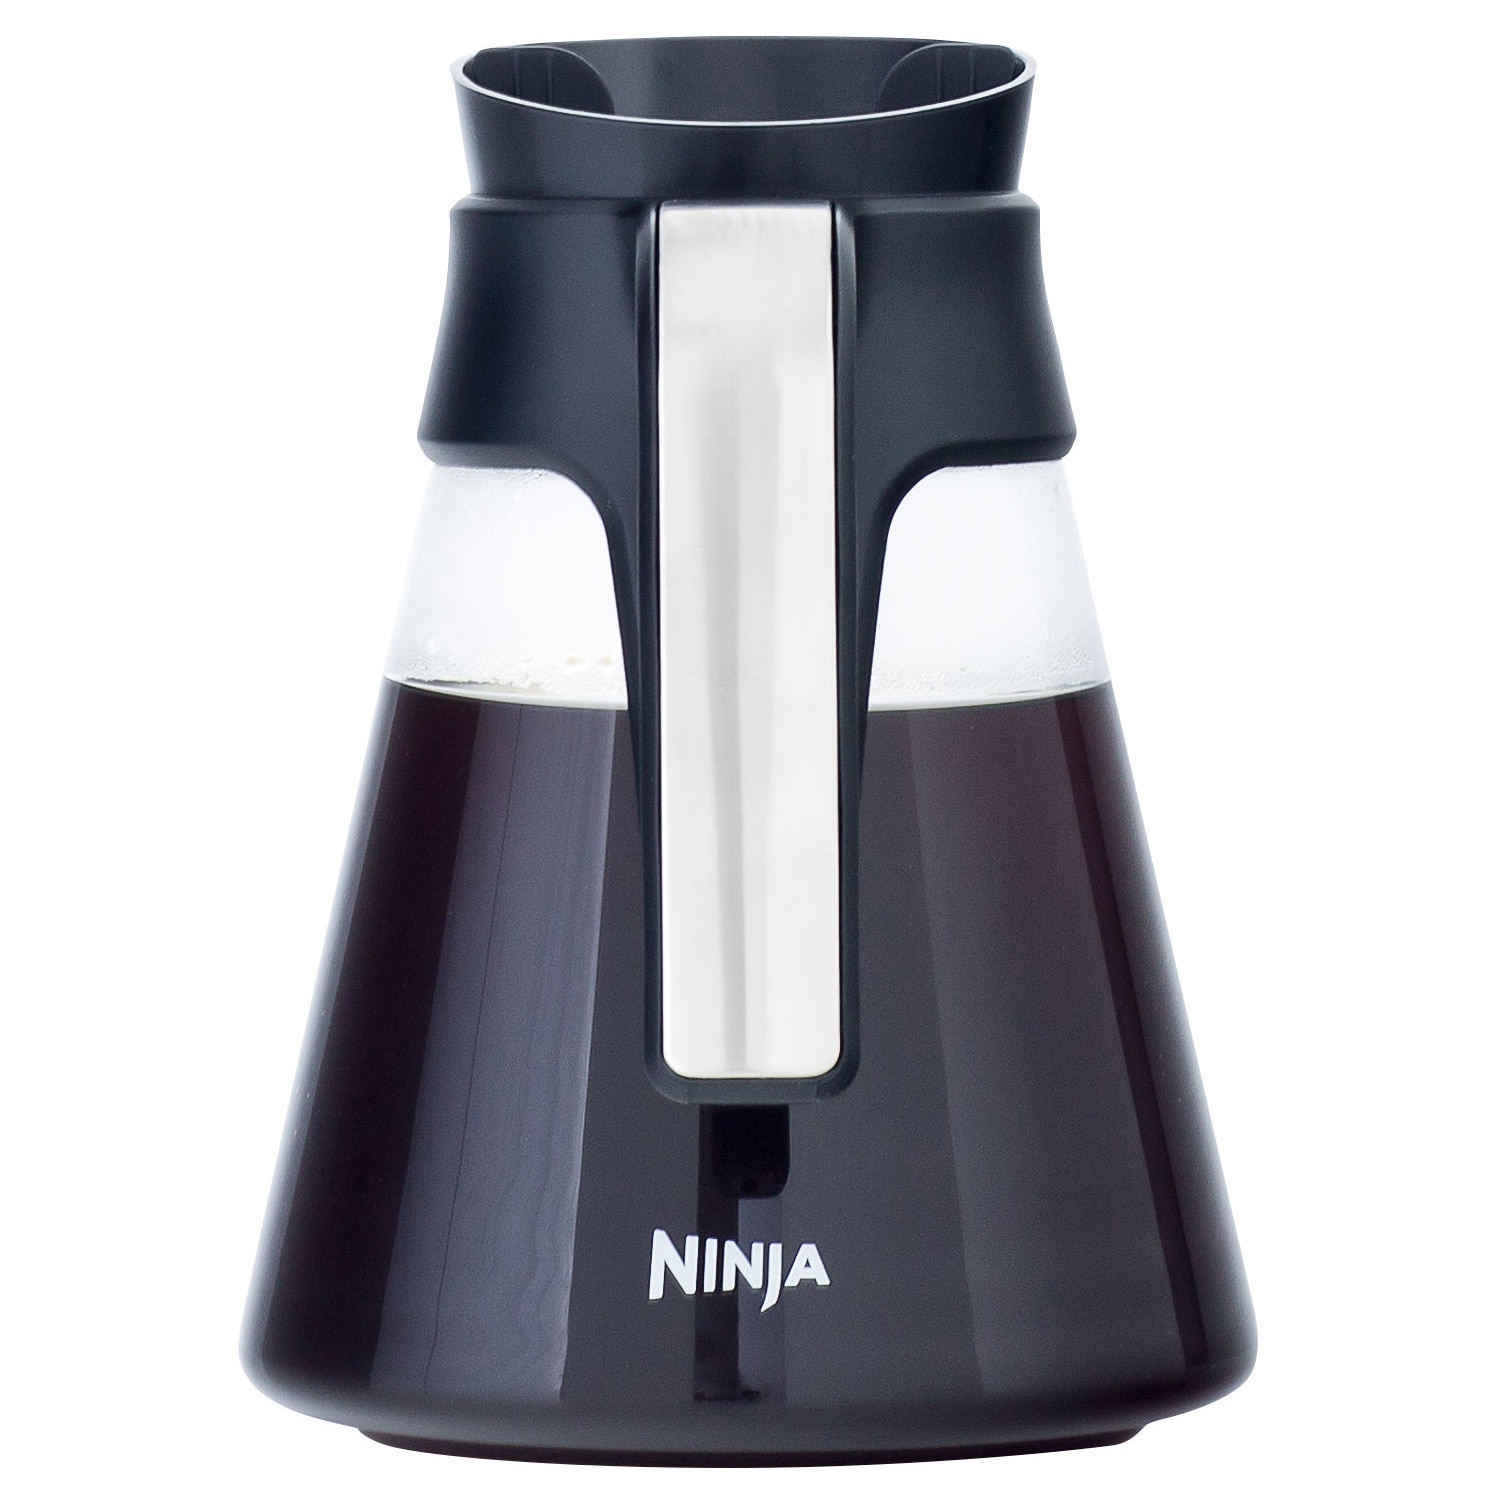  Ninja 10-Cup Glass Carafe Pitcher Replacement for Coffee Bar  Brewers Machine, Lid NOT Included